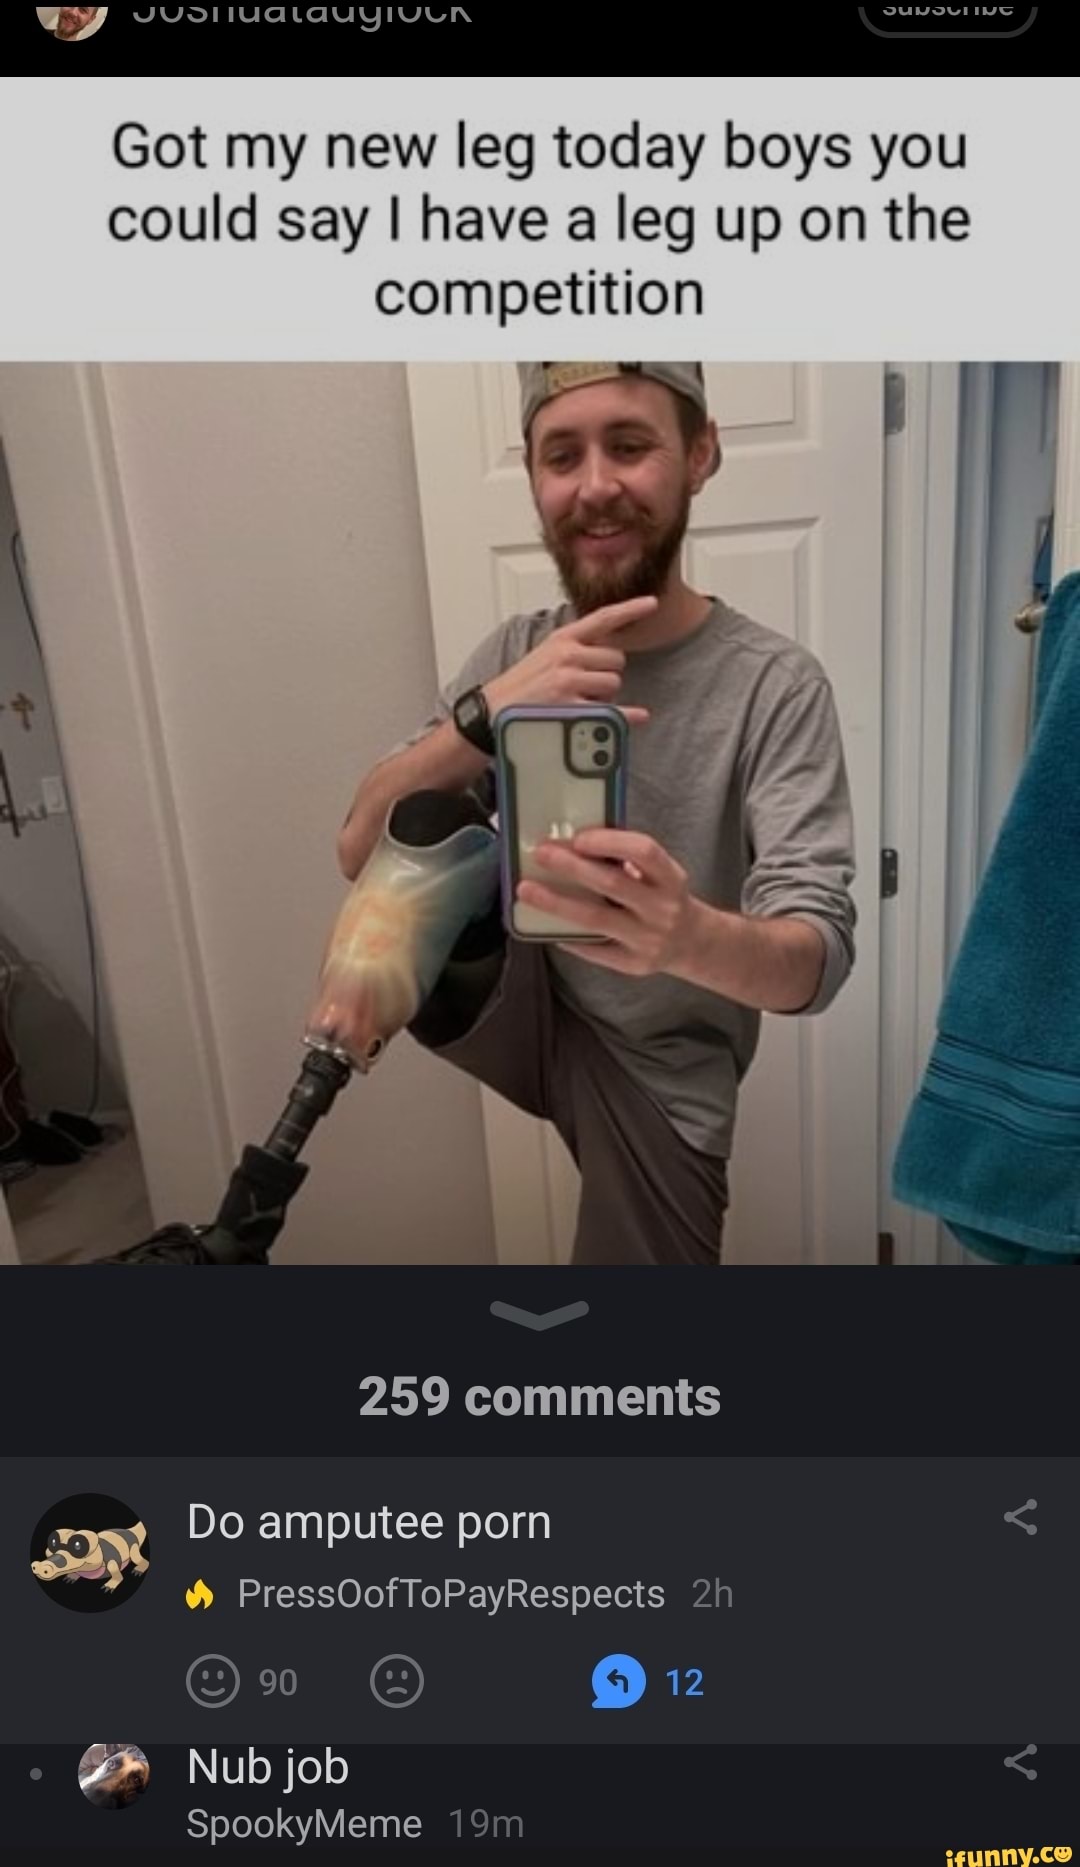 1080px x 1867px - Wy Got my new leg today boys you could say I have a leg up on the  competition 259 comments Do amputee porn PressOofToPayRespects 12 Nub job  SpookyMeme - seo.title